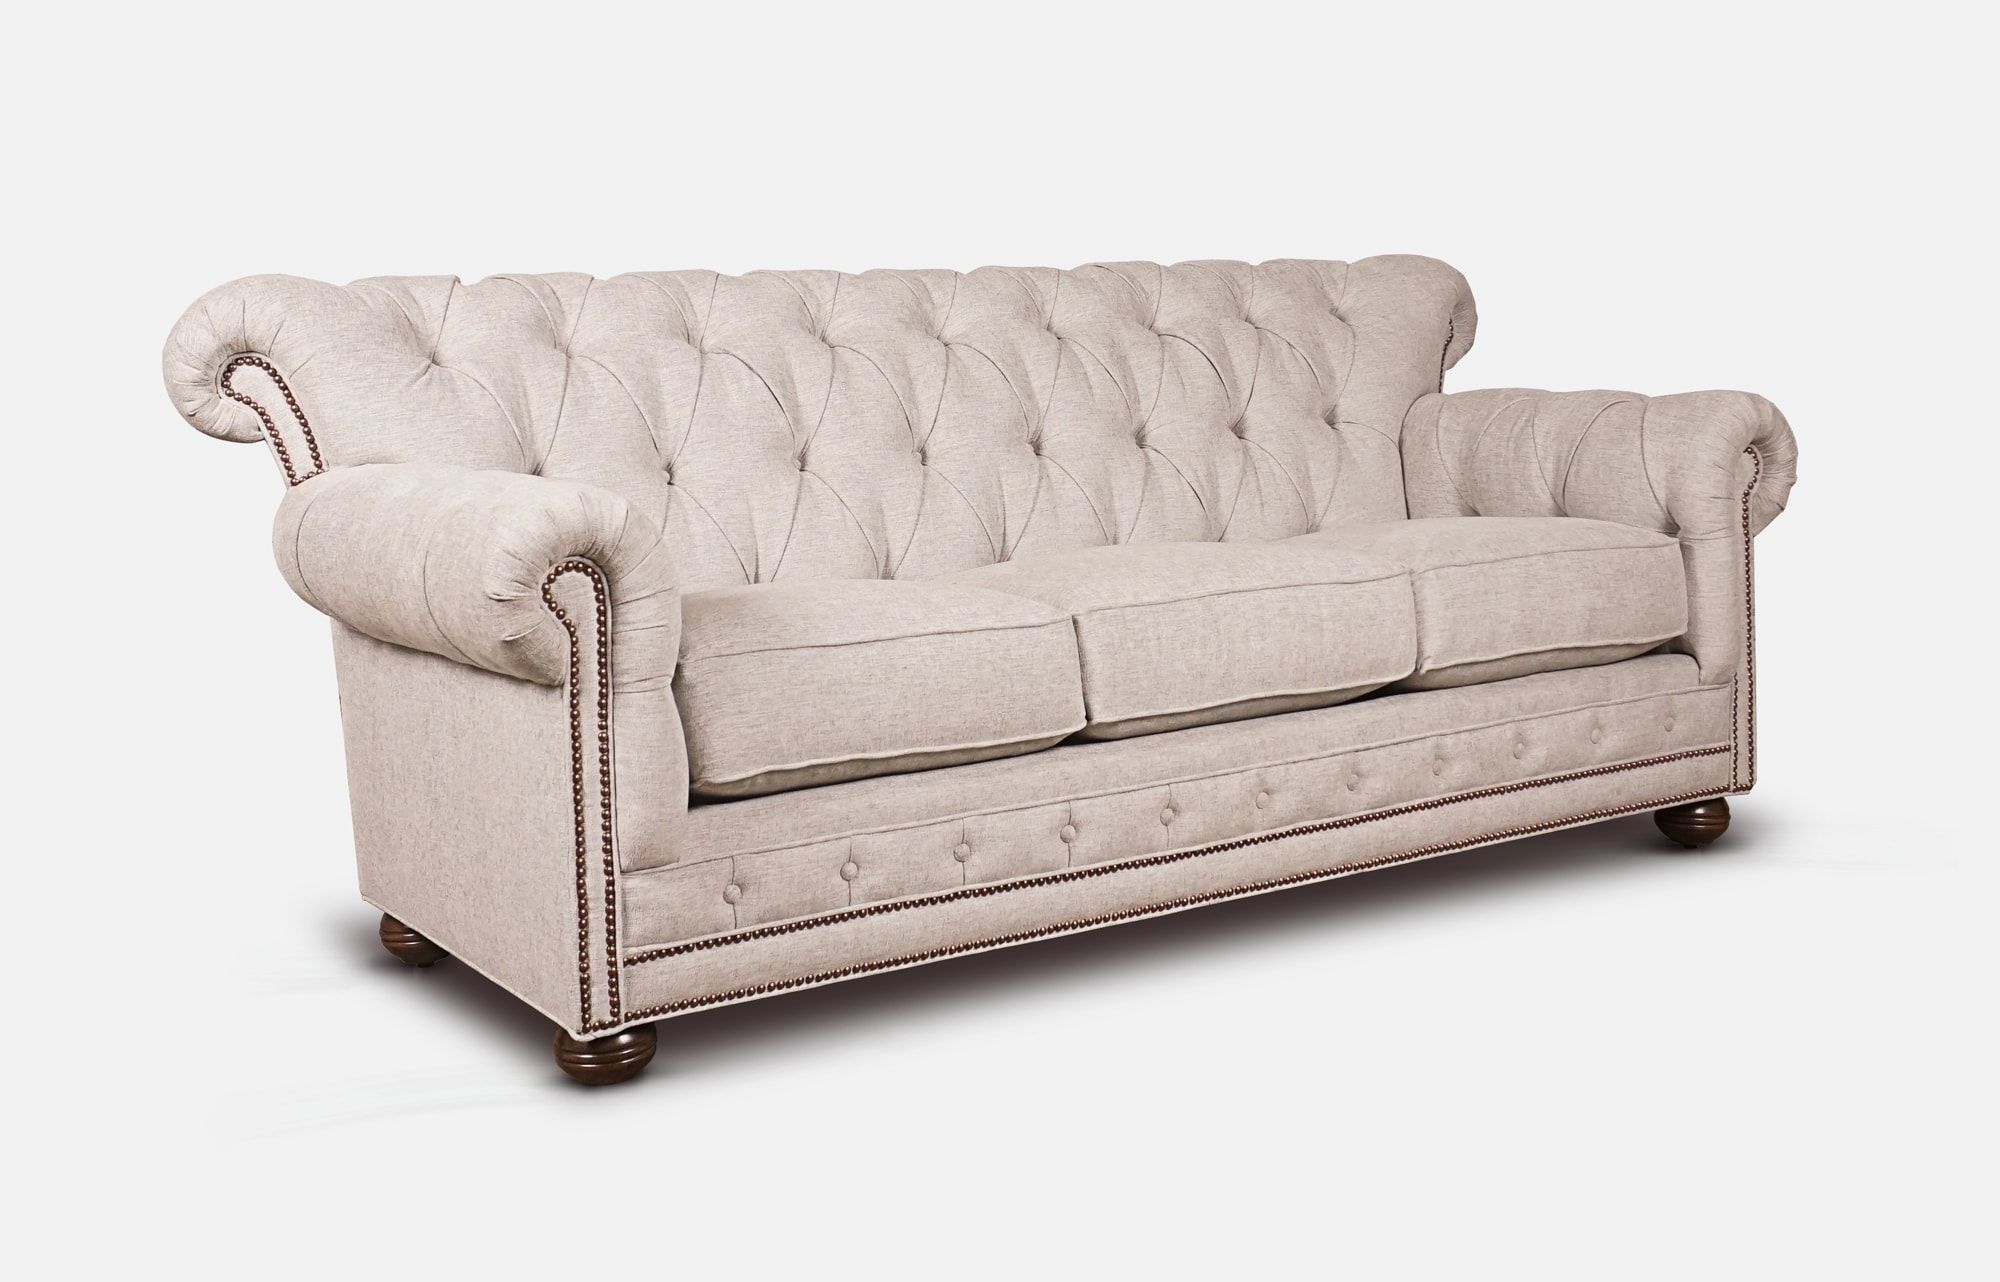 Oiao Eleanor High Back Tufted Chesterfield Sofa Side Angle | Of Iron & Oak With Regard To Tufted Upholstered Sofas (View 13 of 20)